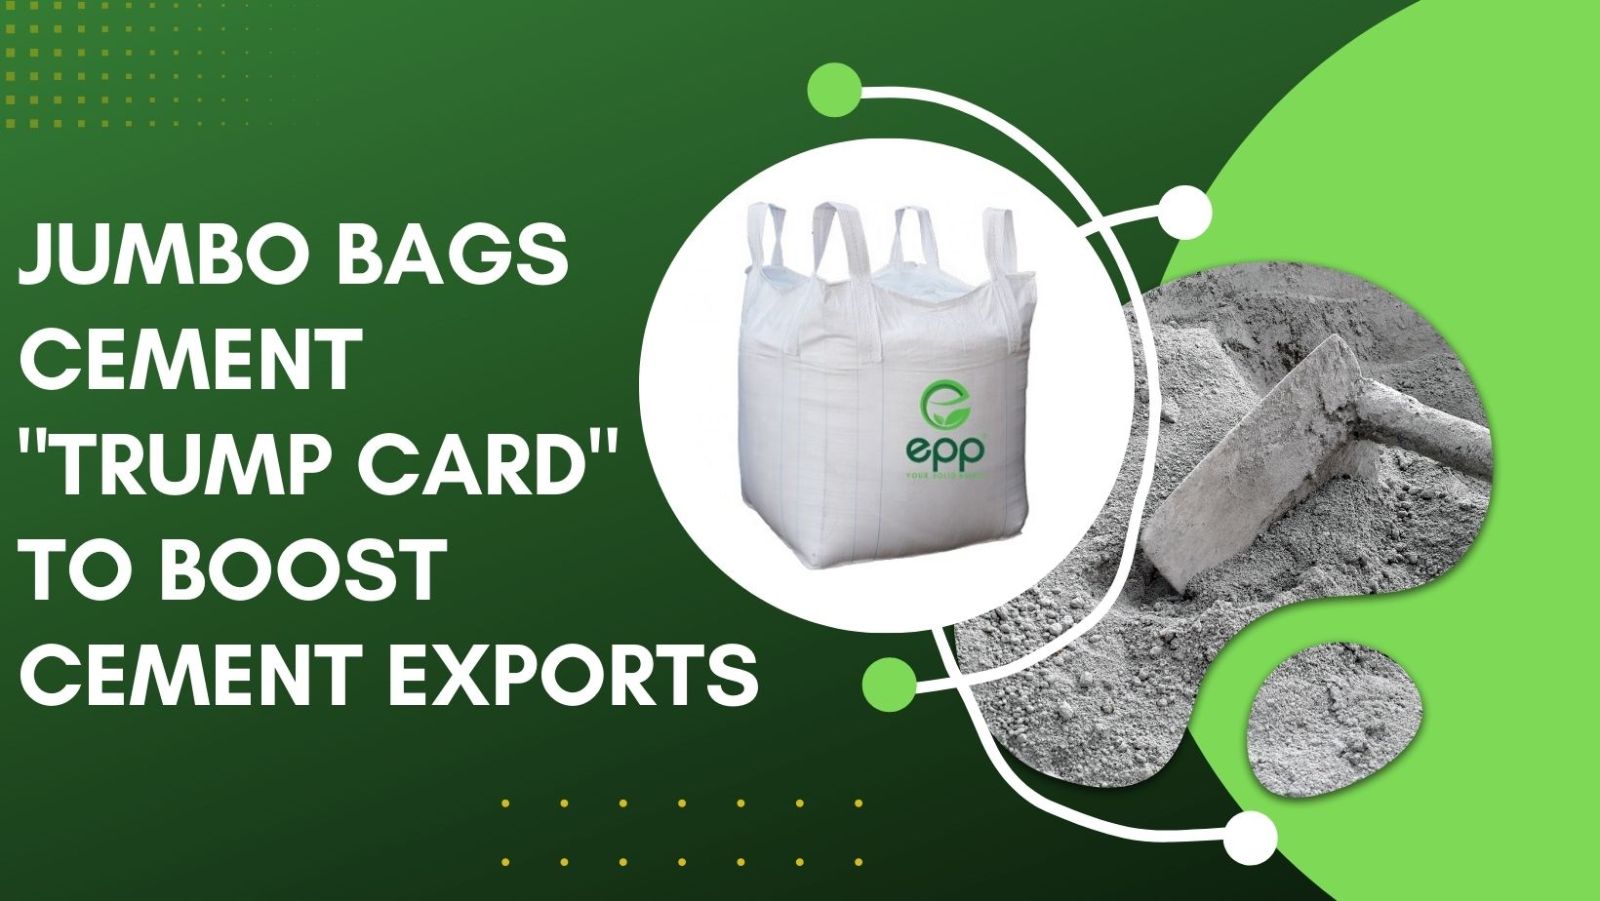 Jumbo-bags-cement-is-the-trump-card-to-boost-cement-exports.jpg